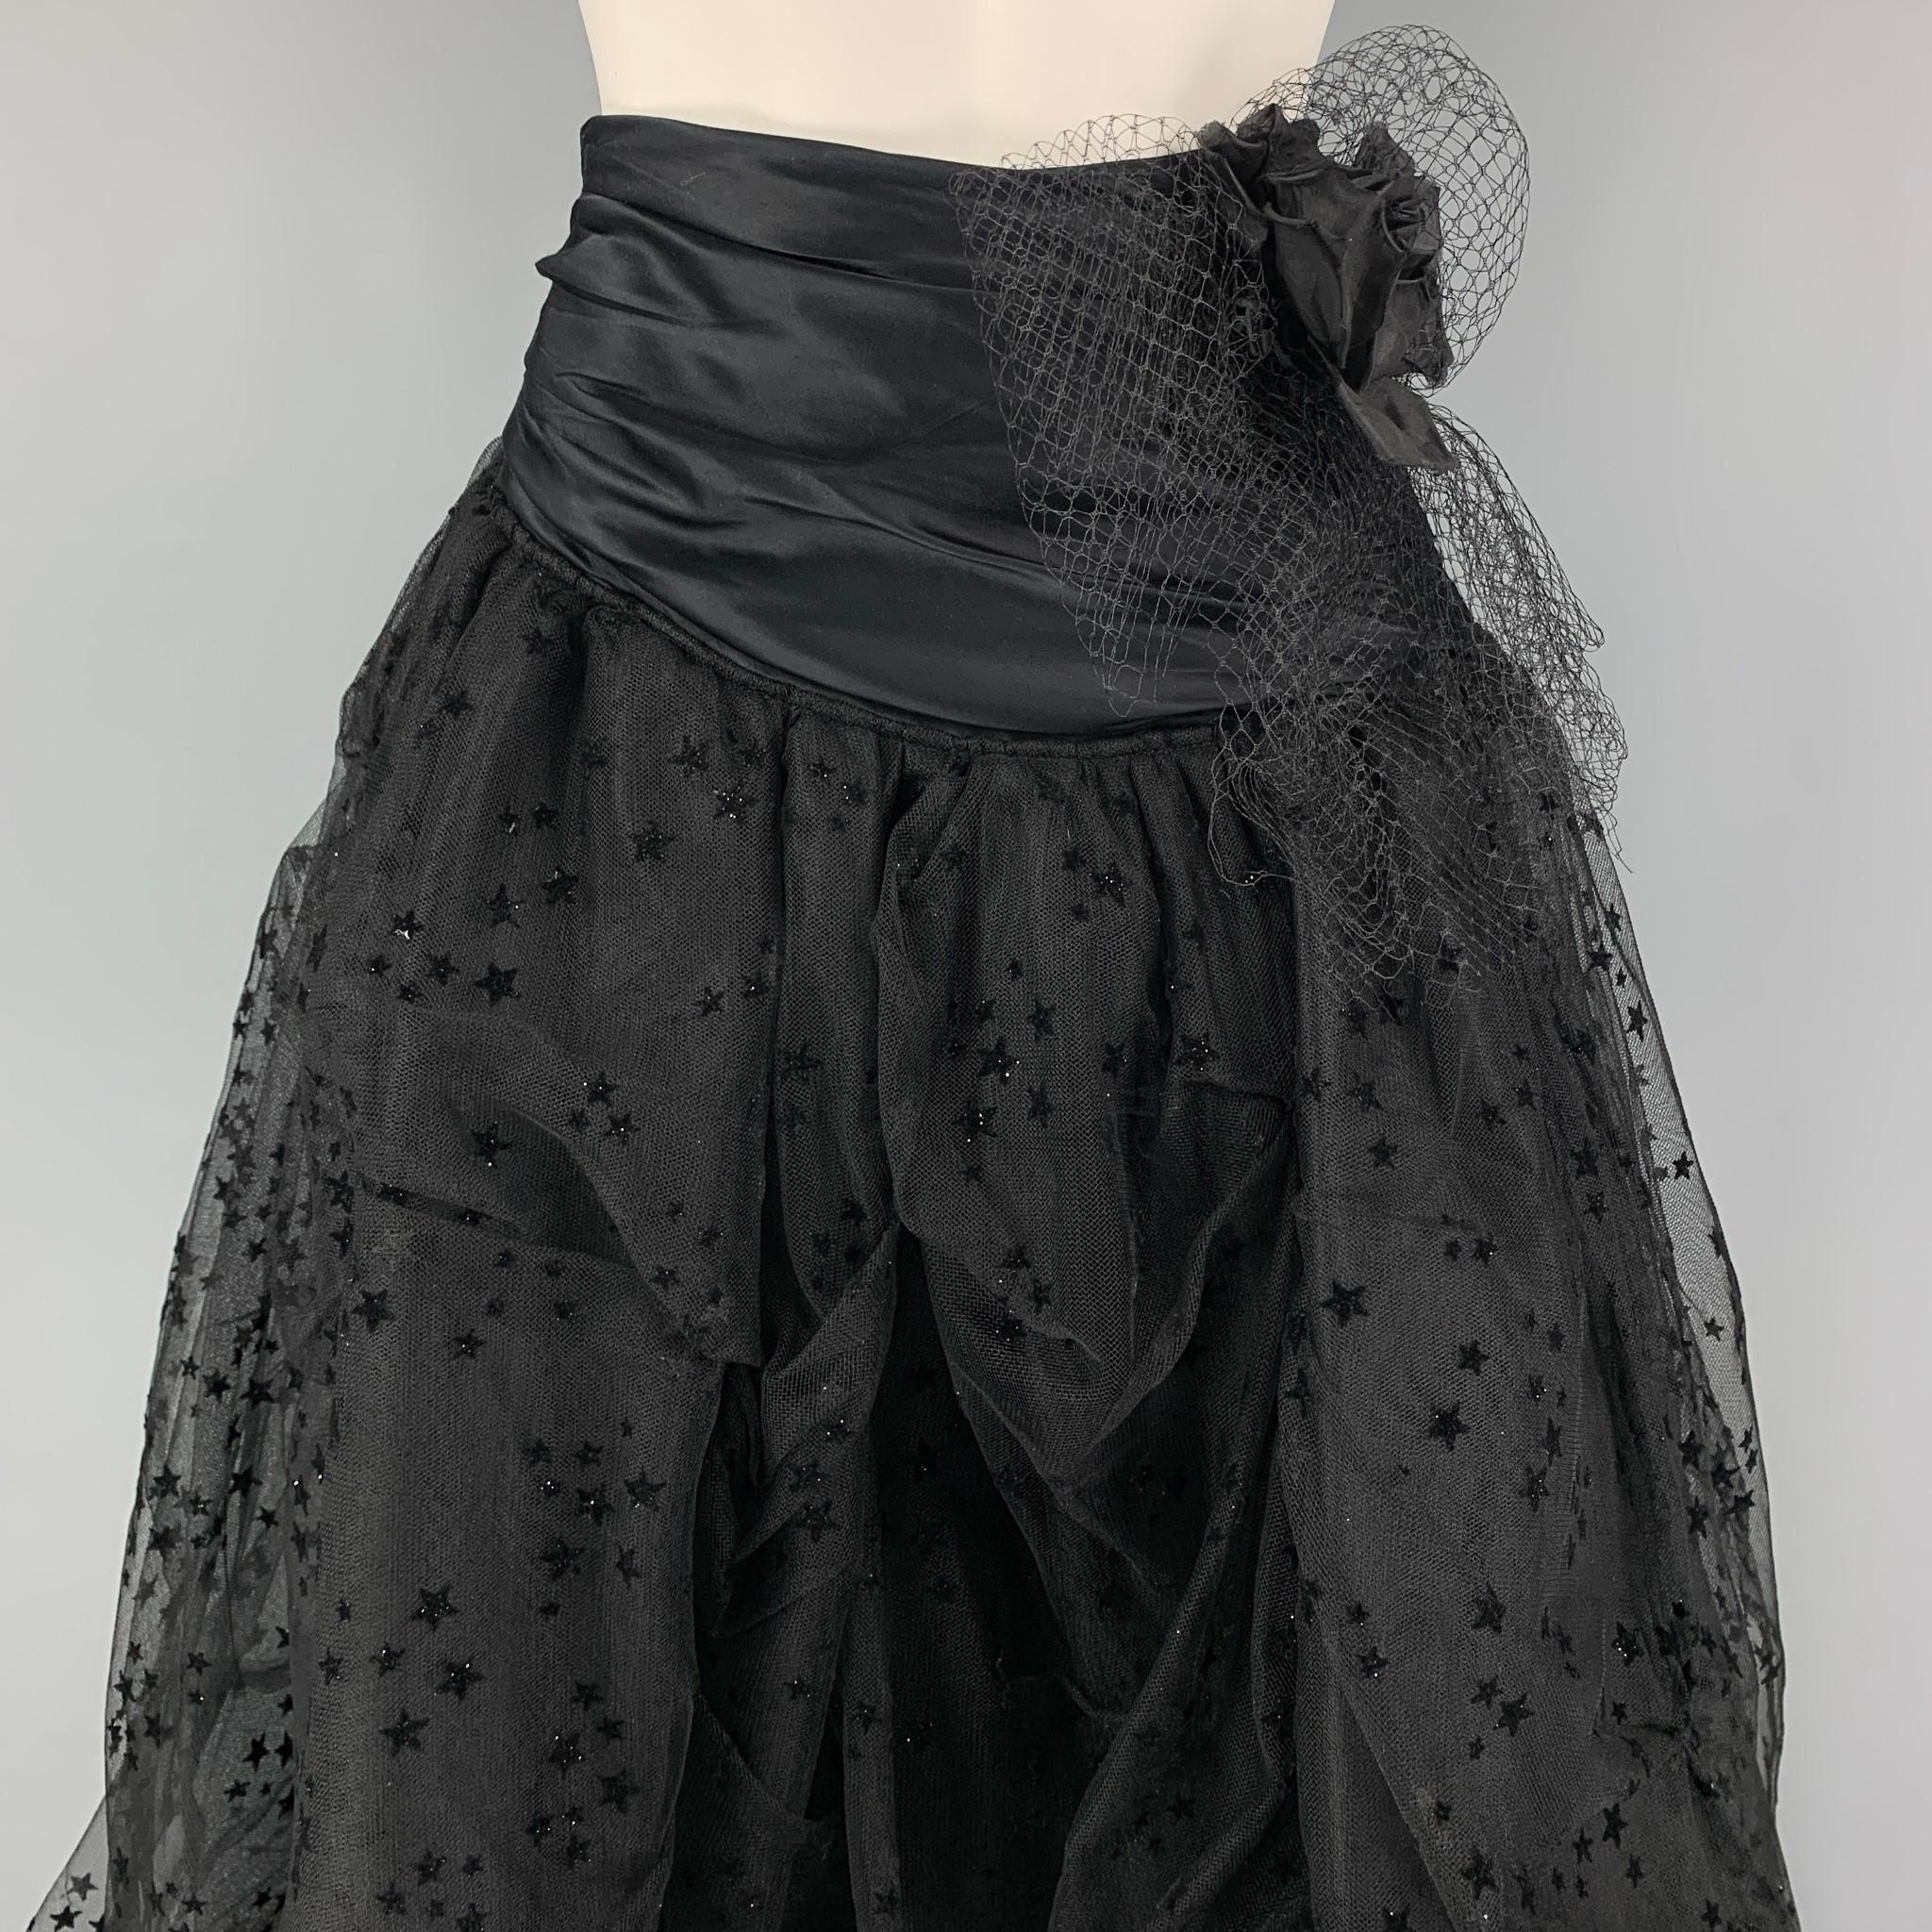 FAITH CONNEXION skirt comes in a black mixed fabrics with a mesh overlay featuring stat details, ruffled flower design, high waisted, and a side hook & loop closure. 

Excellent Pre-Owned Condition.
Marked: 38

Measurements:

Waist: 26 in.
Hip: 44